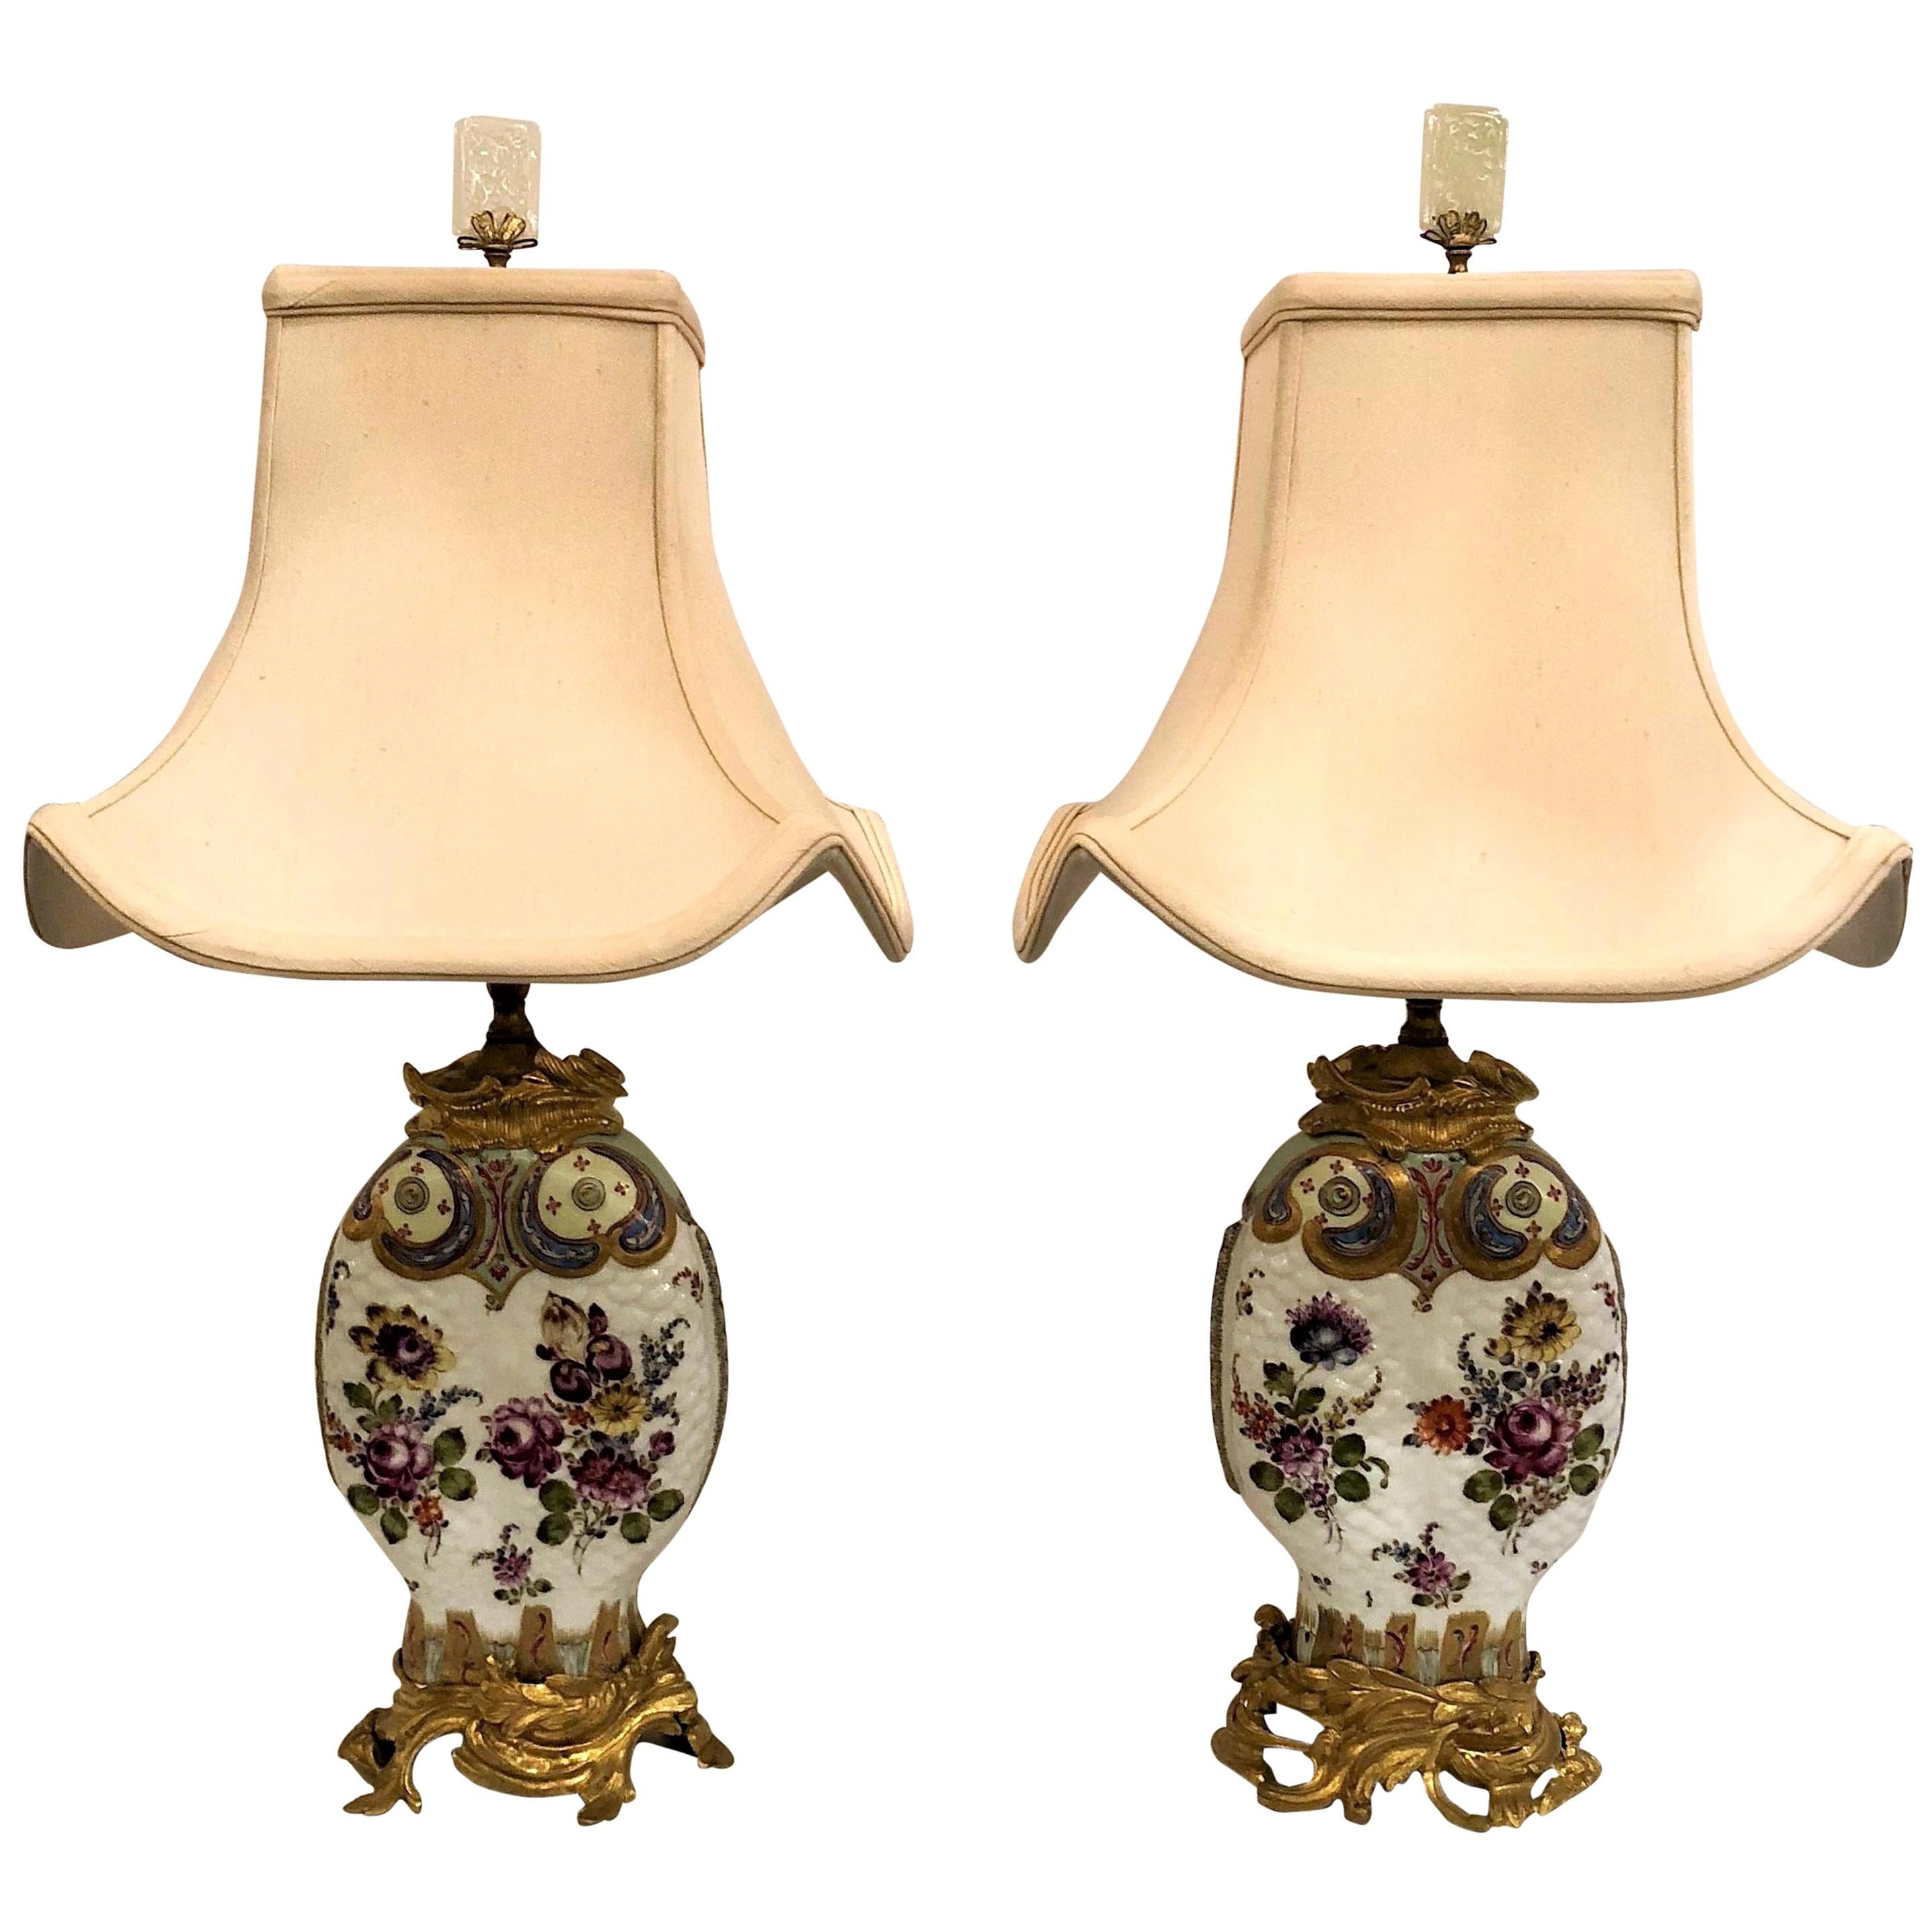 Pair of Antique Chinoiserie Porcelain Lamps with Ormolu Mounts